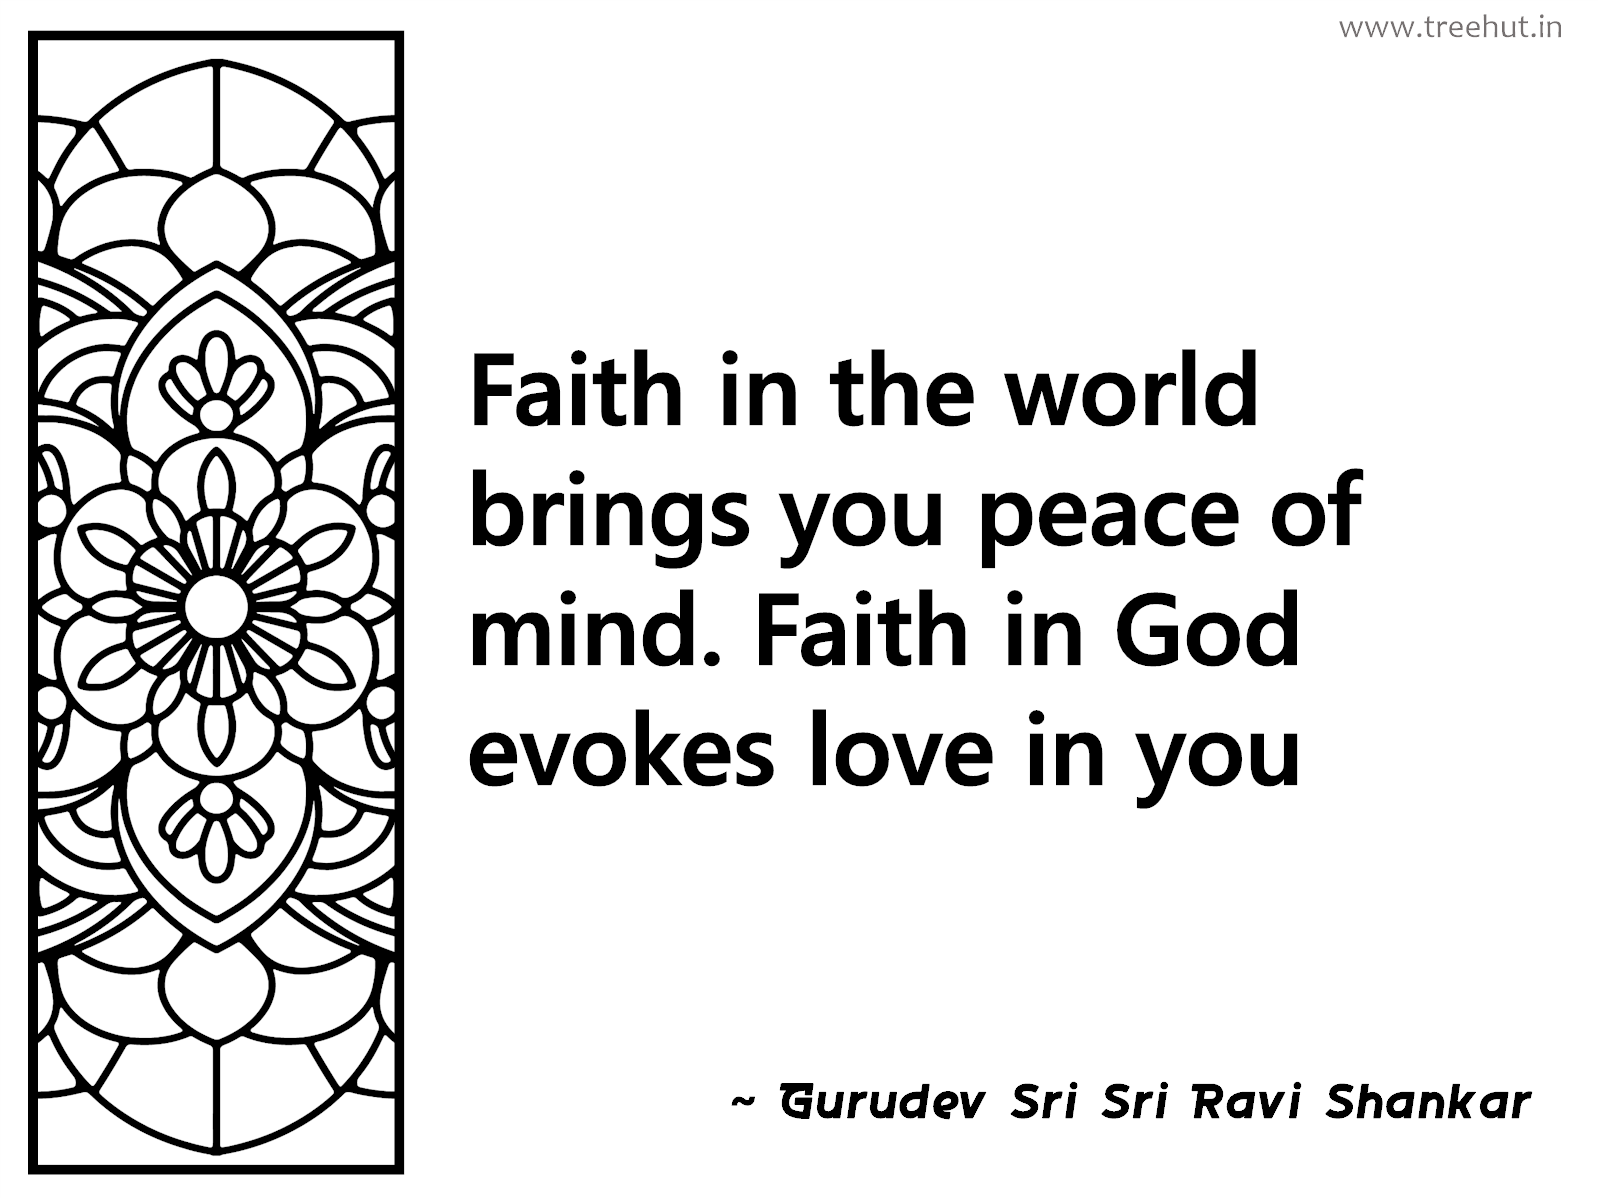 Faith in the world brings you peace of mind. Faith in God evokes love in you Inspirational Quote by Gurudev Sri Sri Ravi Shankar, coloring pages